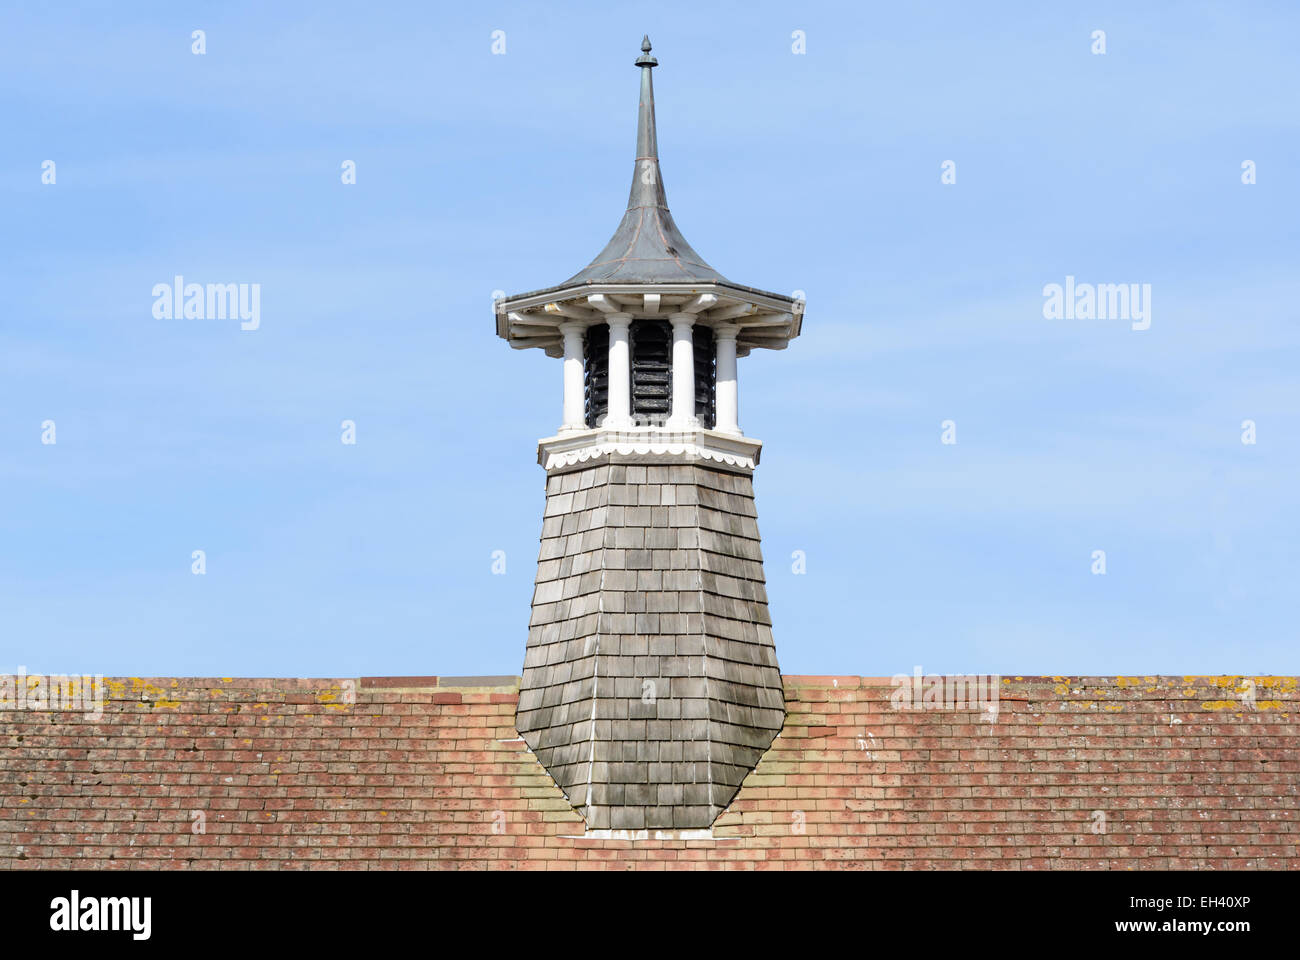 Cupola on the roof of an Edwardian building. Stock Photo